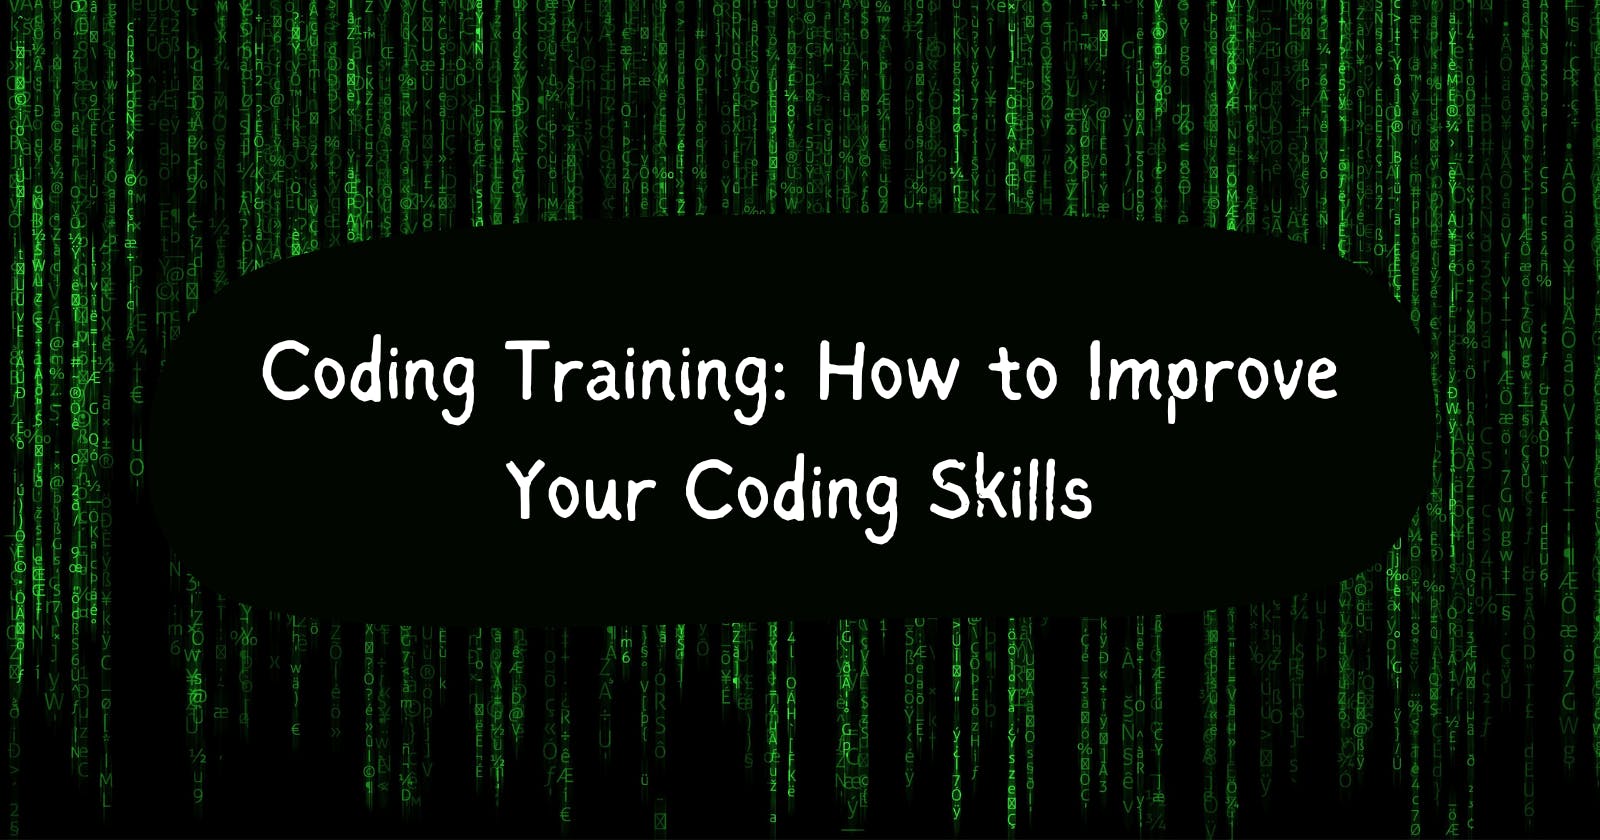 Coding Training: How to Improve Your Coding Skills